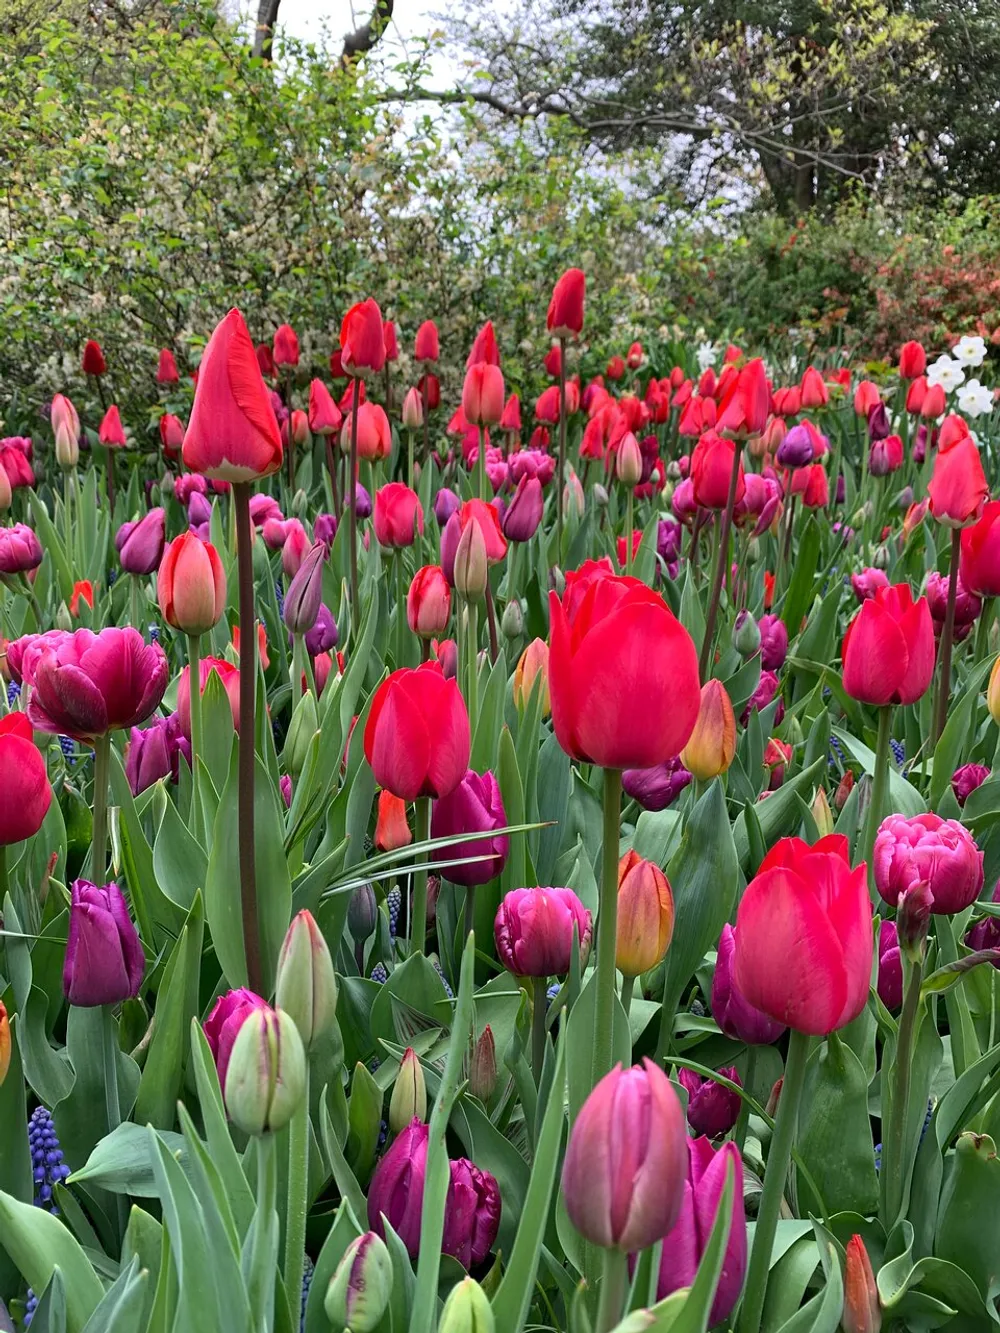 The image depicts a vibrant and lush garden filled with various shades of blooming tulips